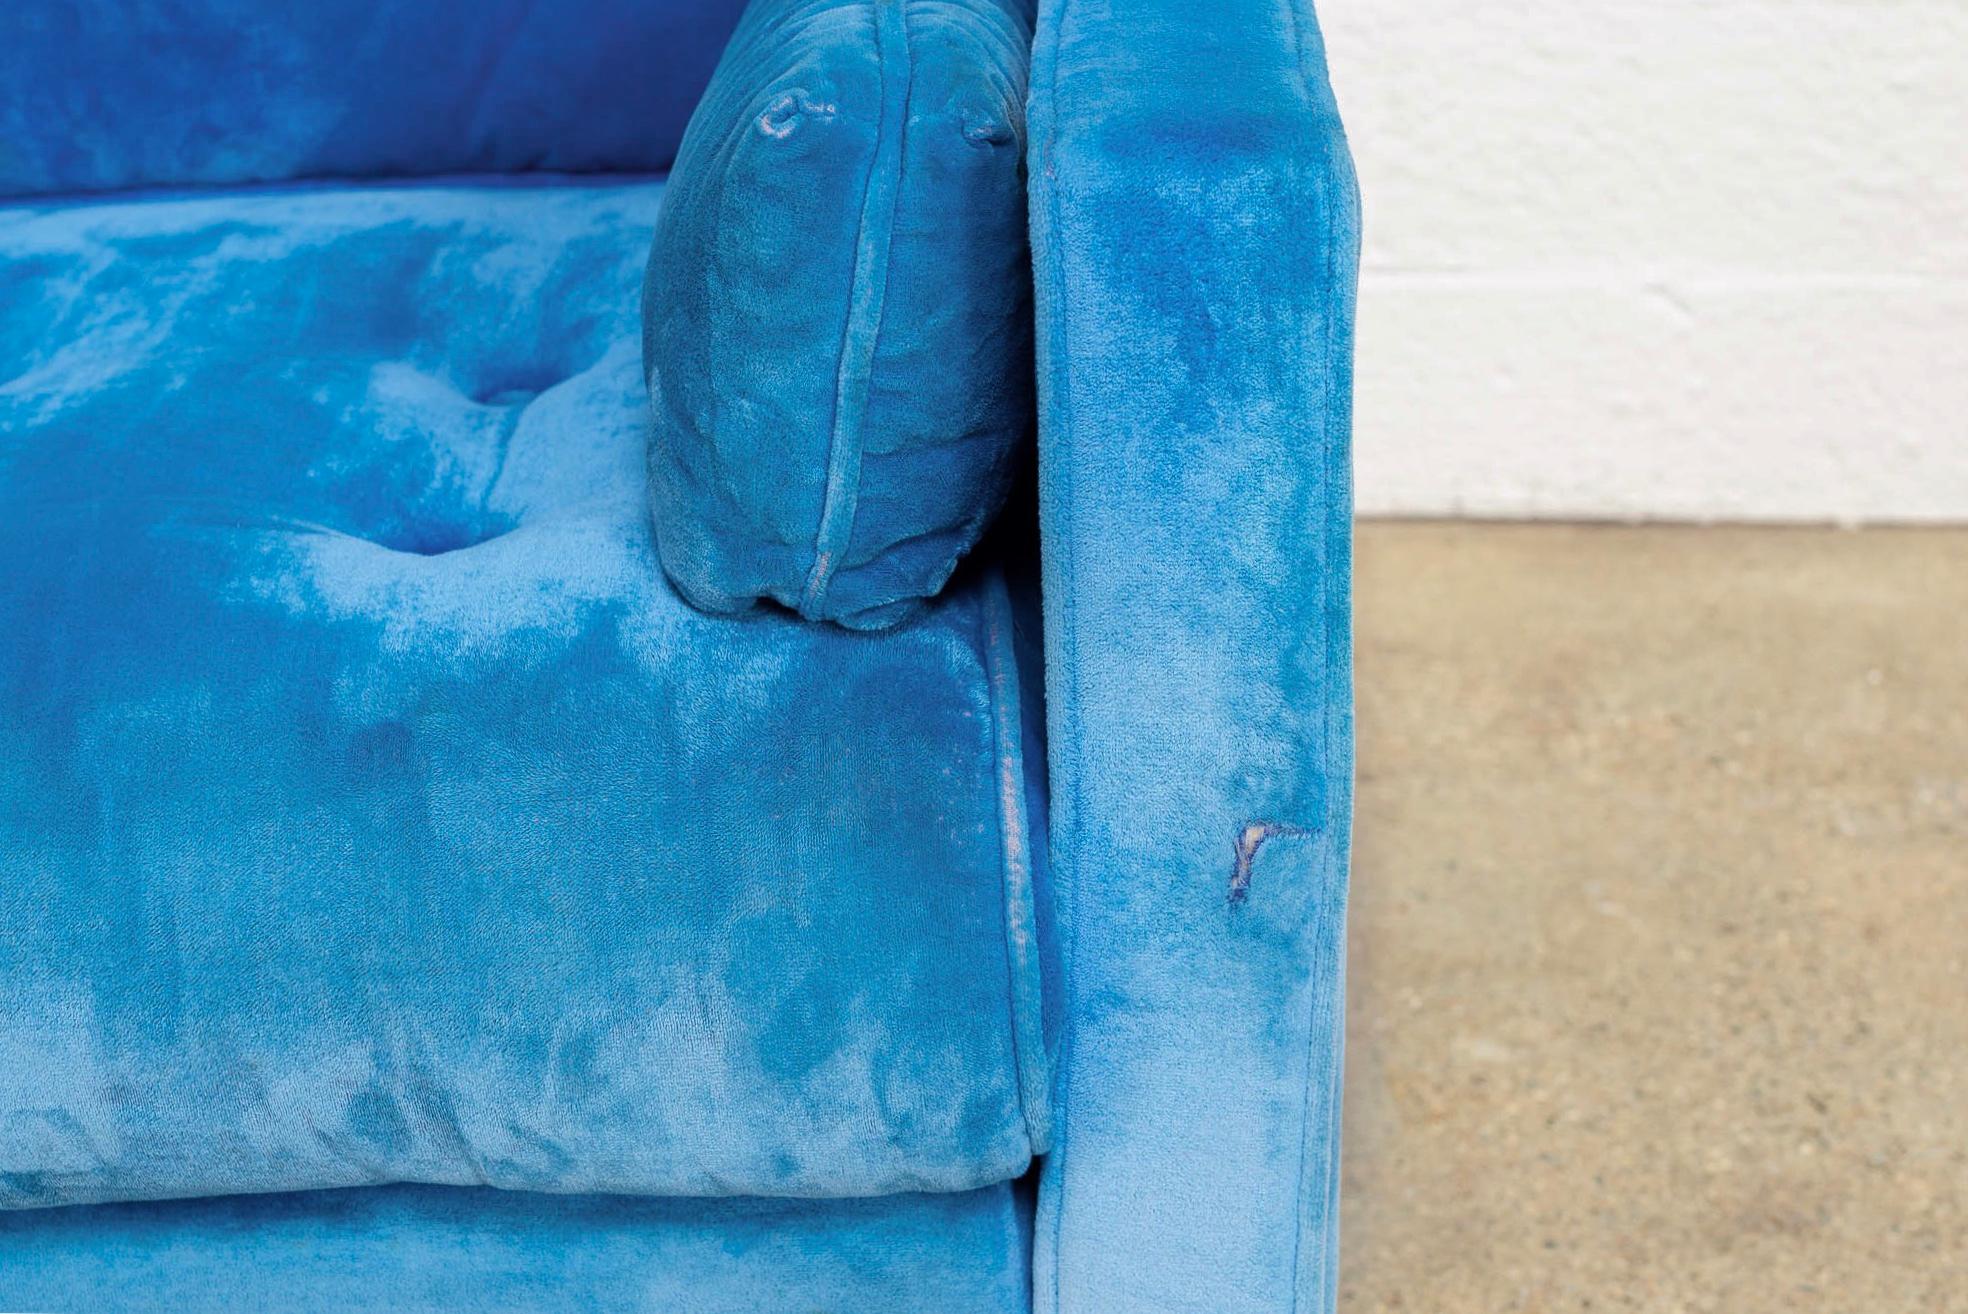 Midcentury Blue Velvet Upholstered Three-Seat Sofa Couch, 1970s For Sale 2